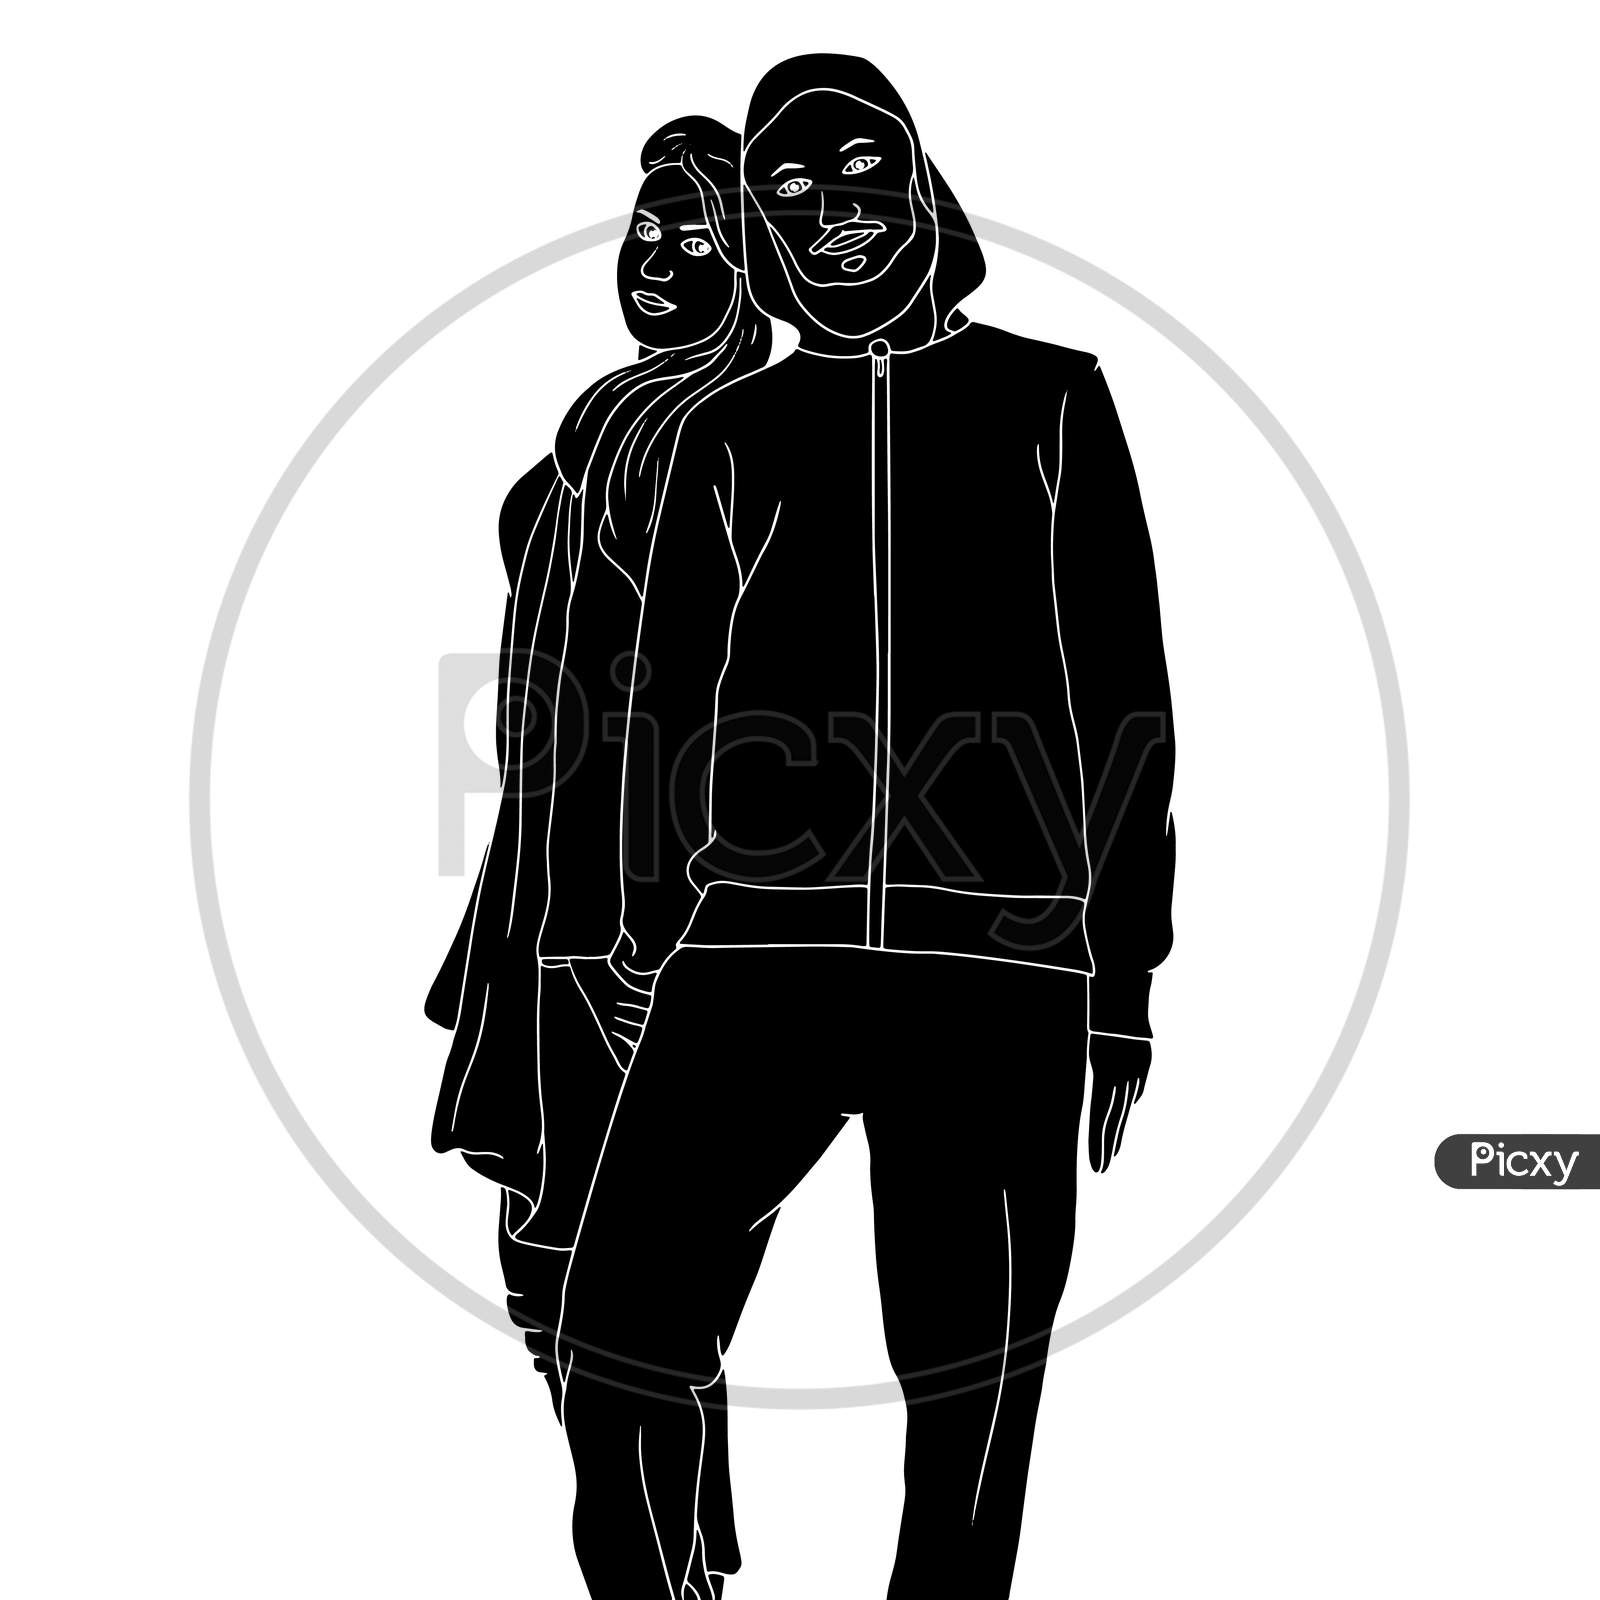 A Couple In A Standing Pose, The Silhouette Of People For Friendship Day. Hand-Drawn Character Illustration Of Happy People.